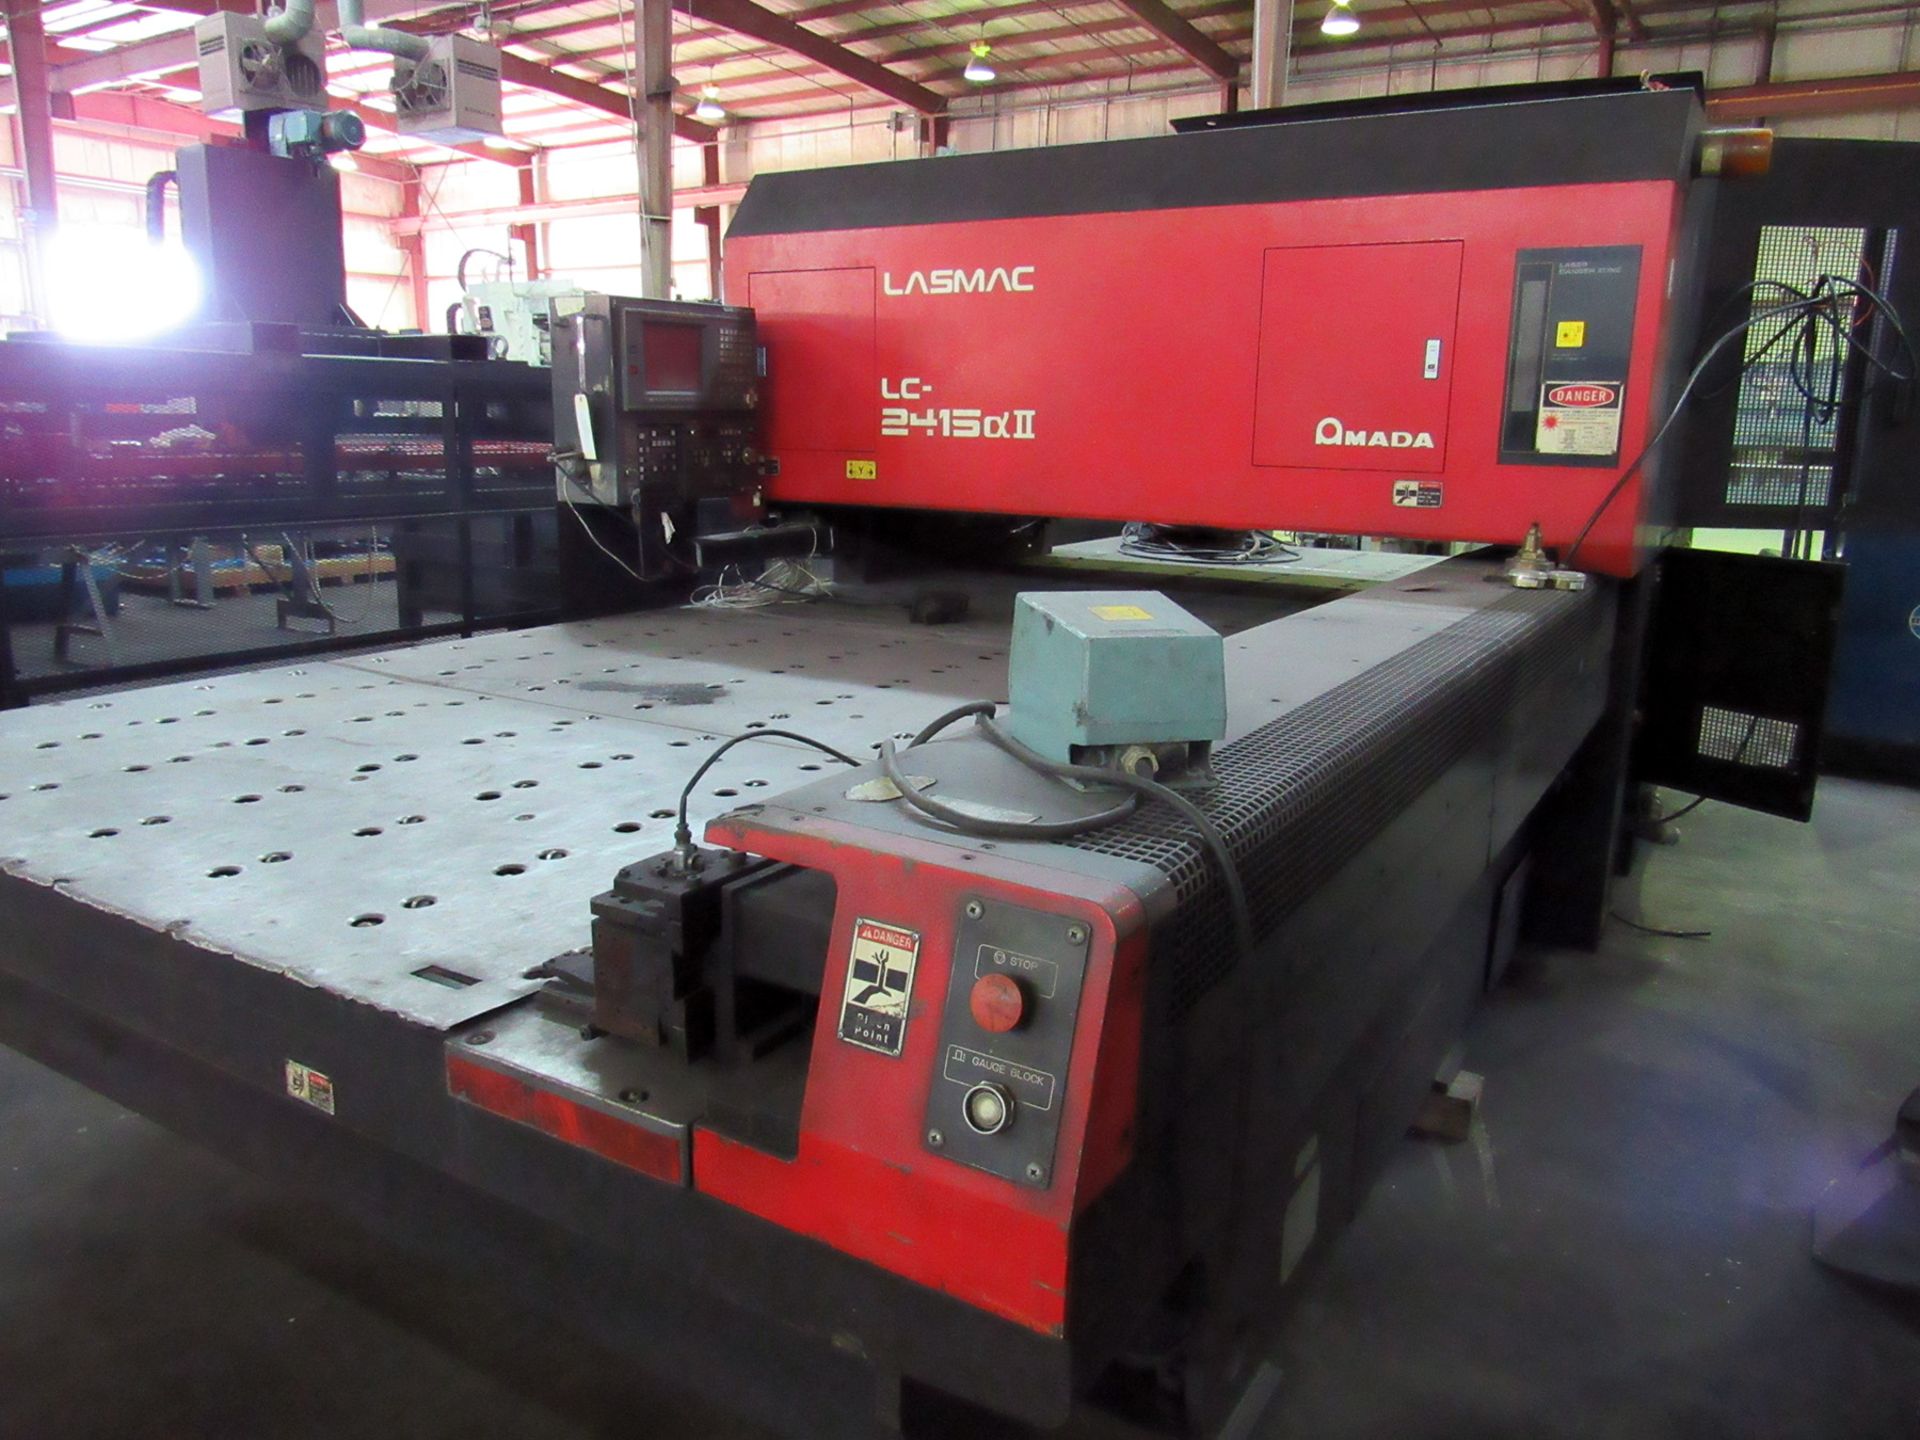 Amada Model LC2415 II Laser with MP1530 Sheet Loader - Image 2 of 12